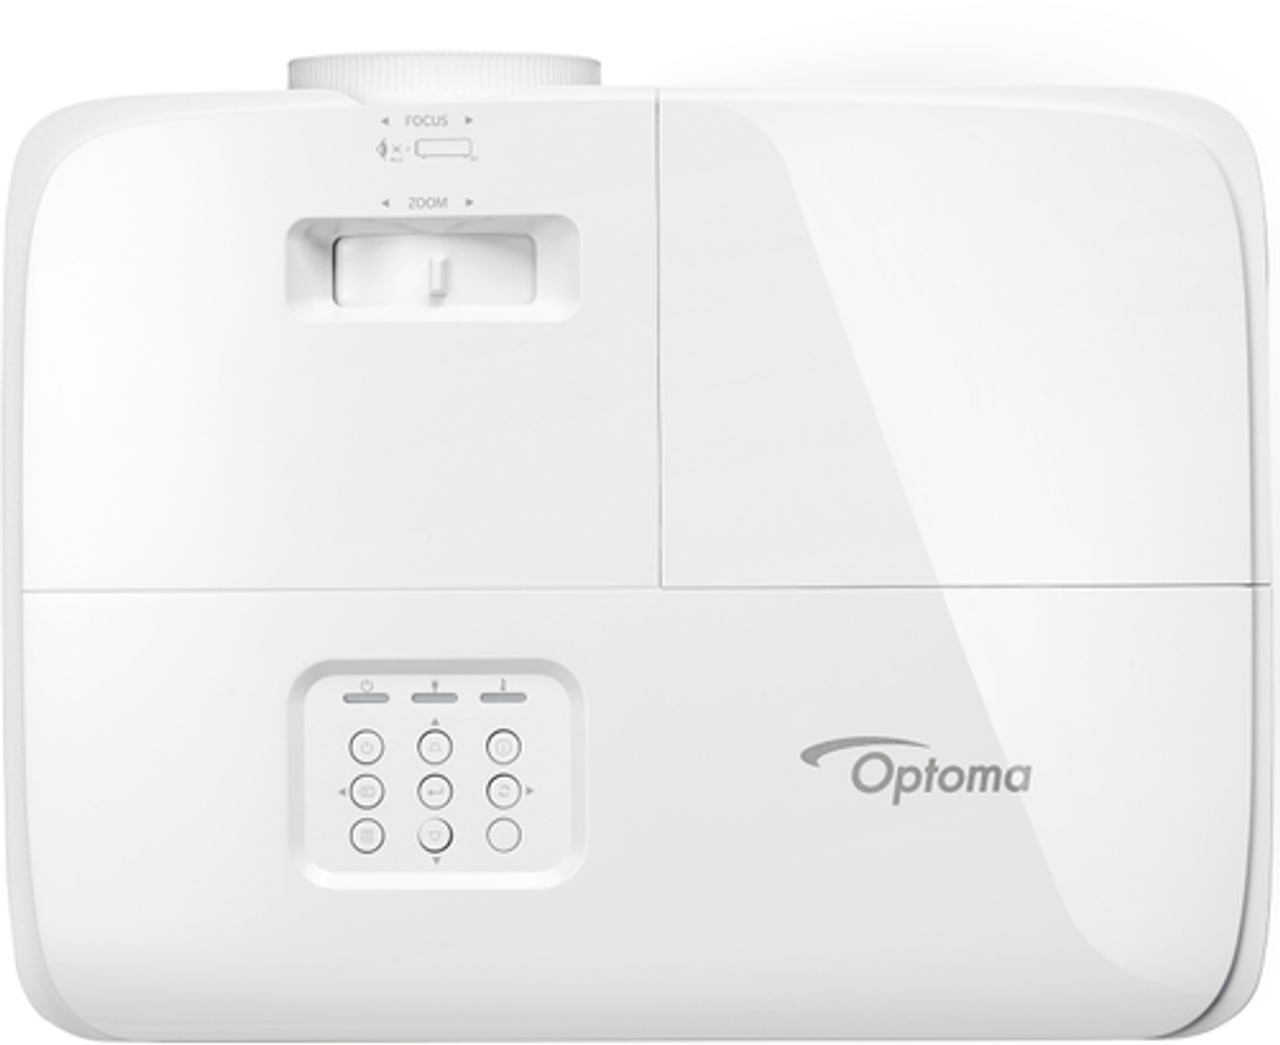 Optoma - HD30LV Compact Gaming and Home Theater Projector, 1080p with 4K HDR Input, High Bright 4500 Lumens for Day and Night Use - White